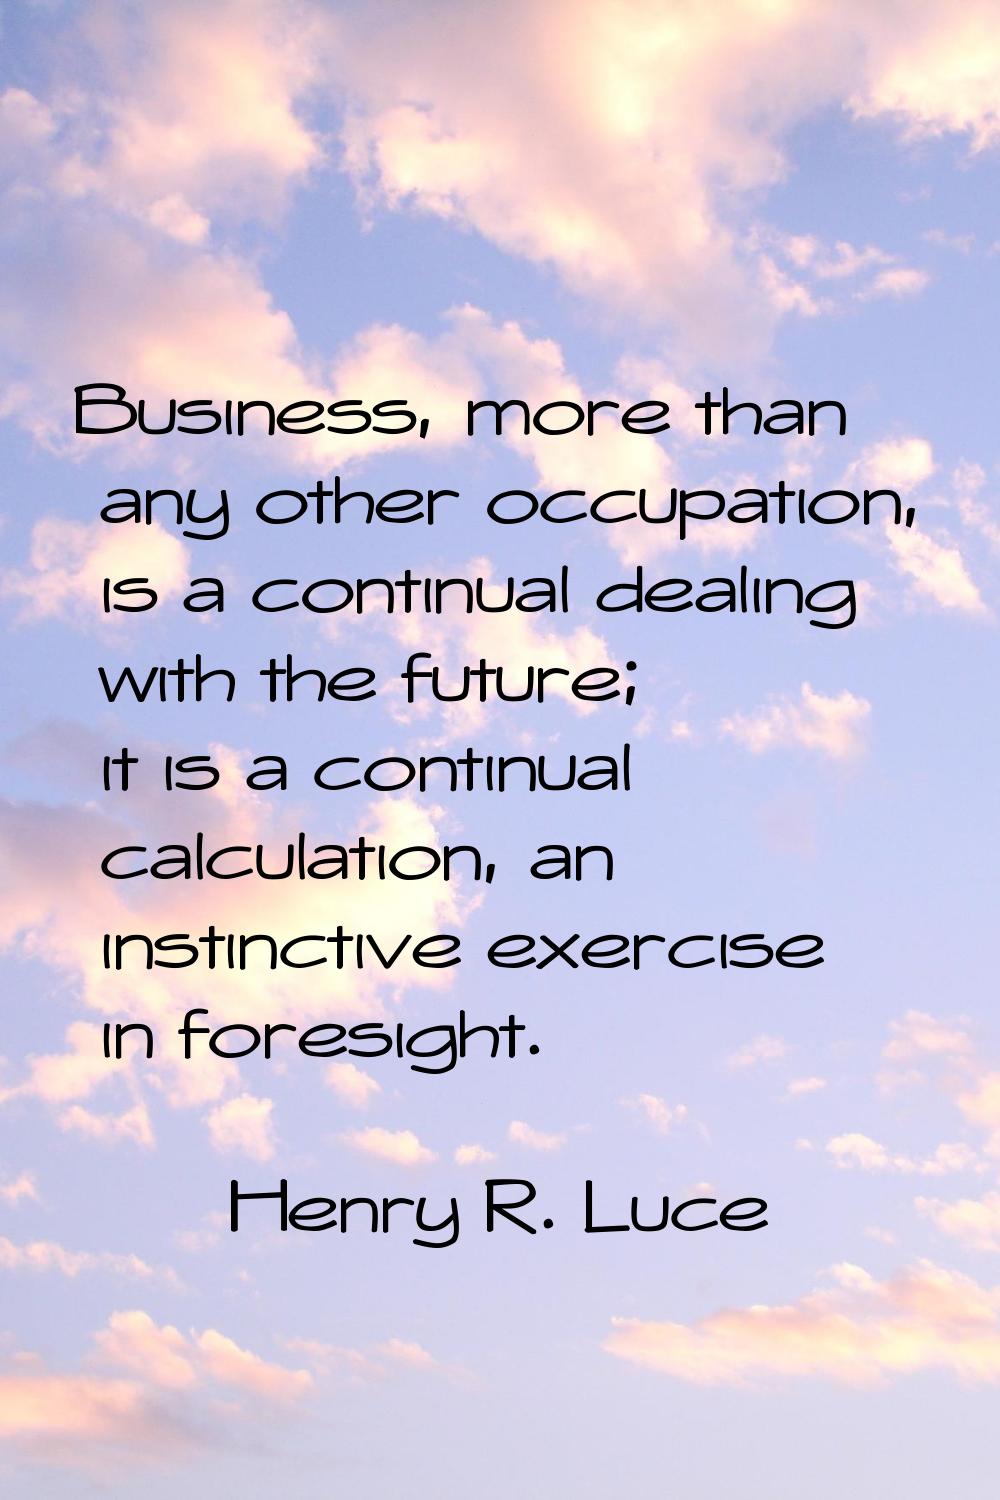 Business, more than any other occupation, is a continual dealing with the future; it is a continual